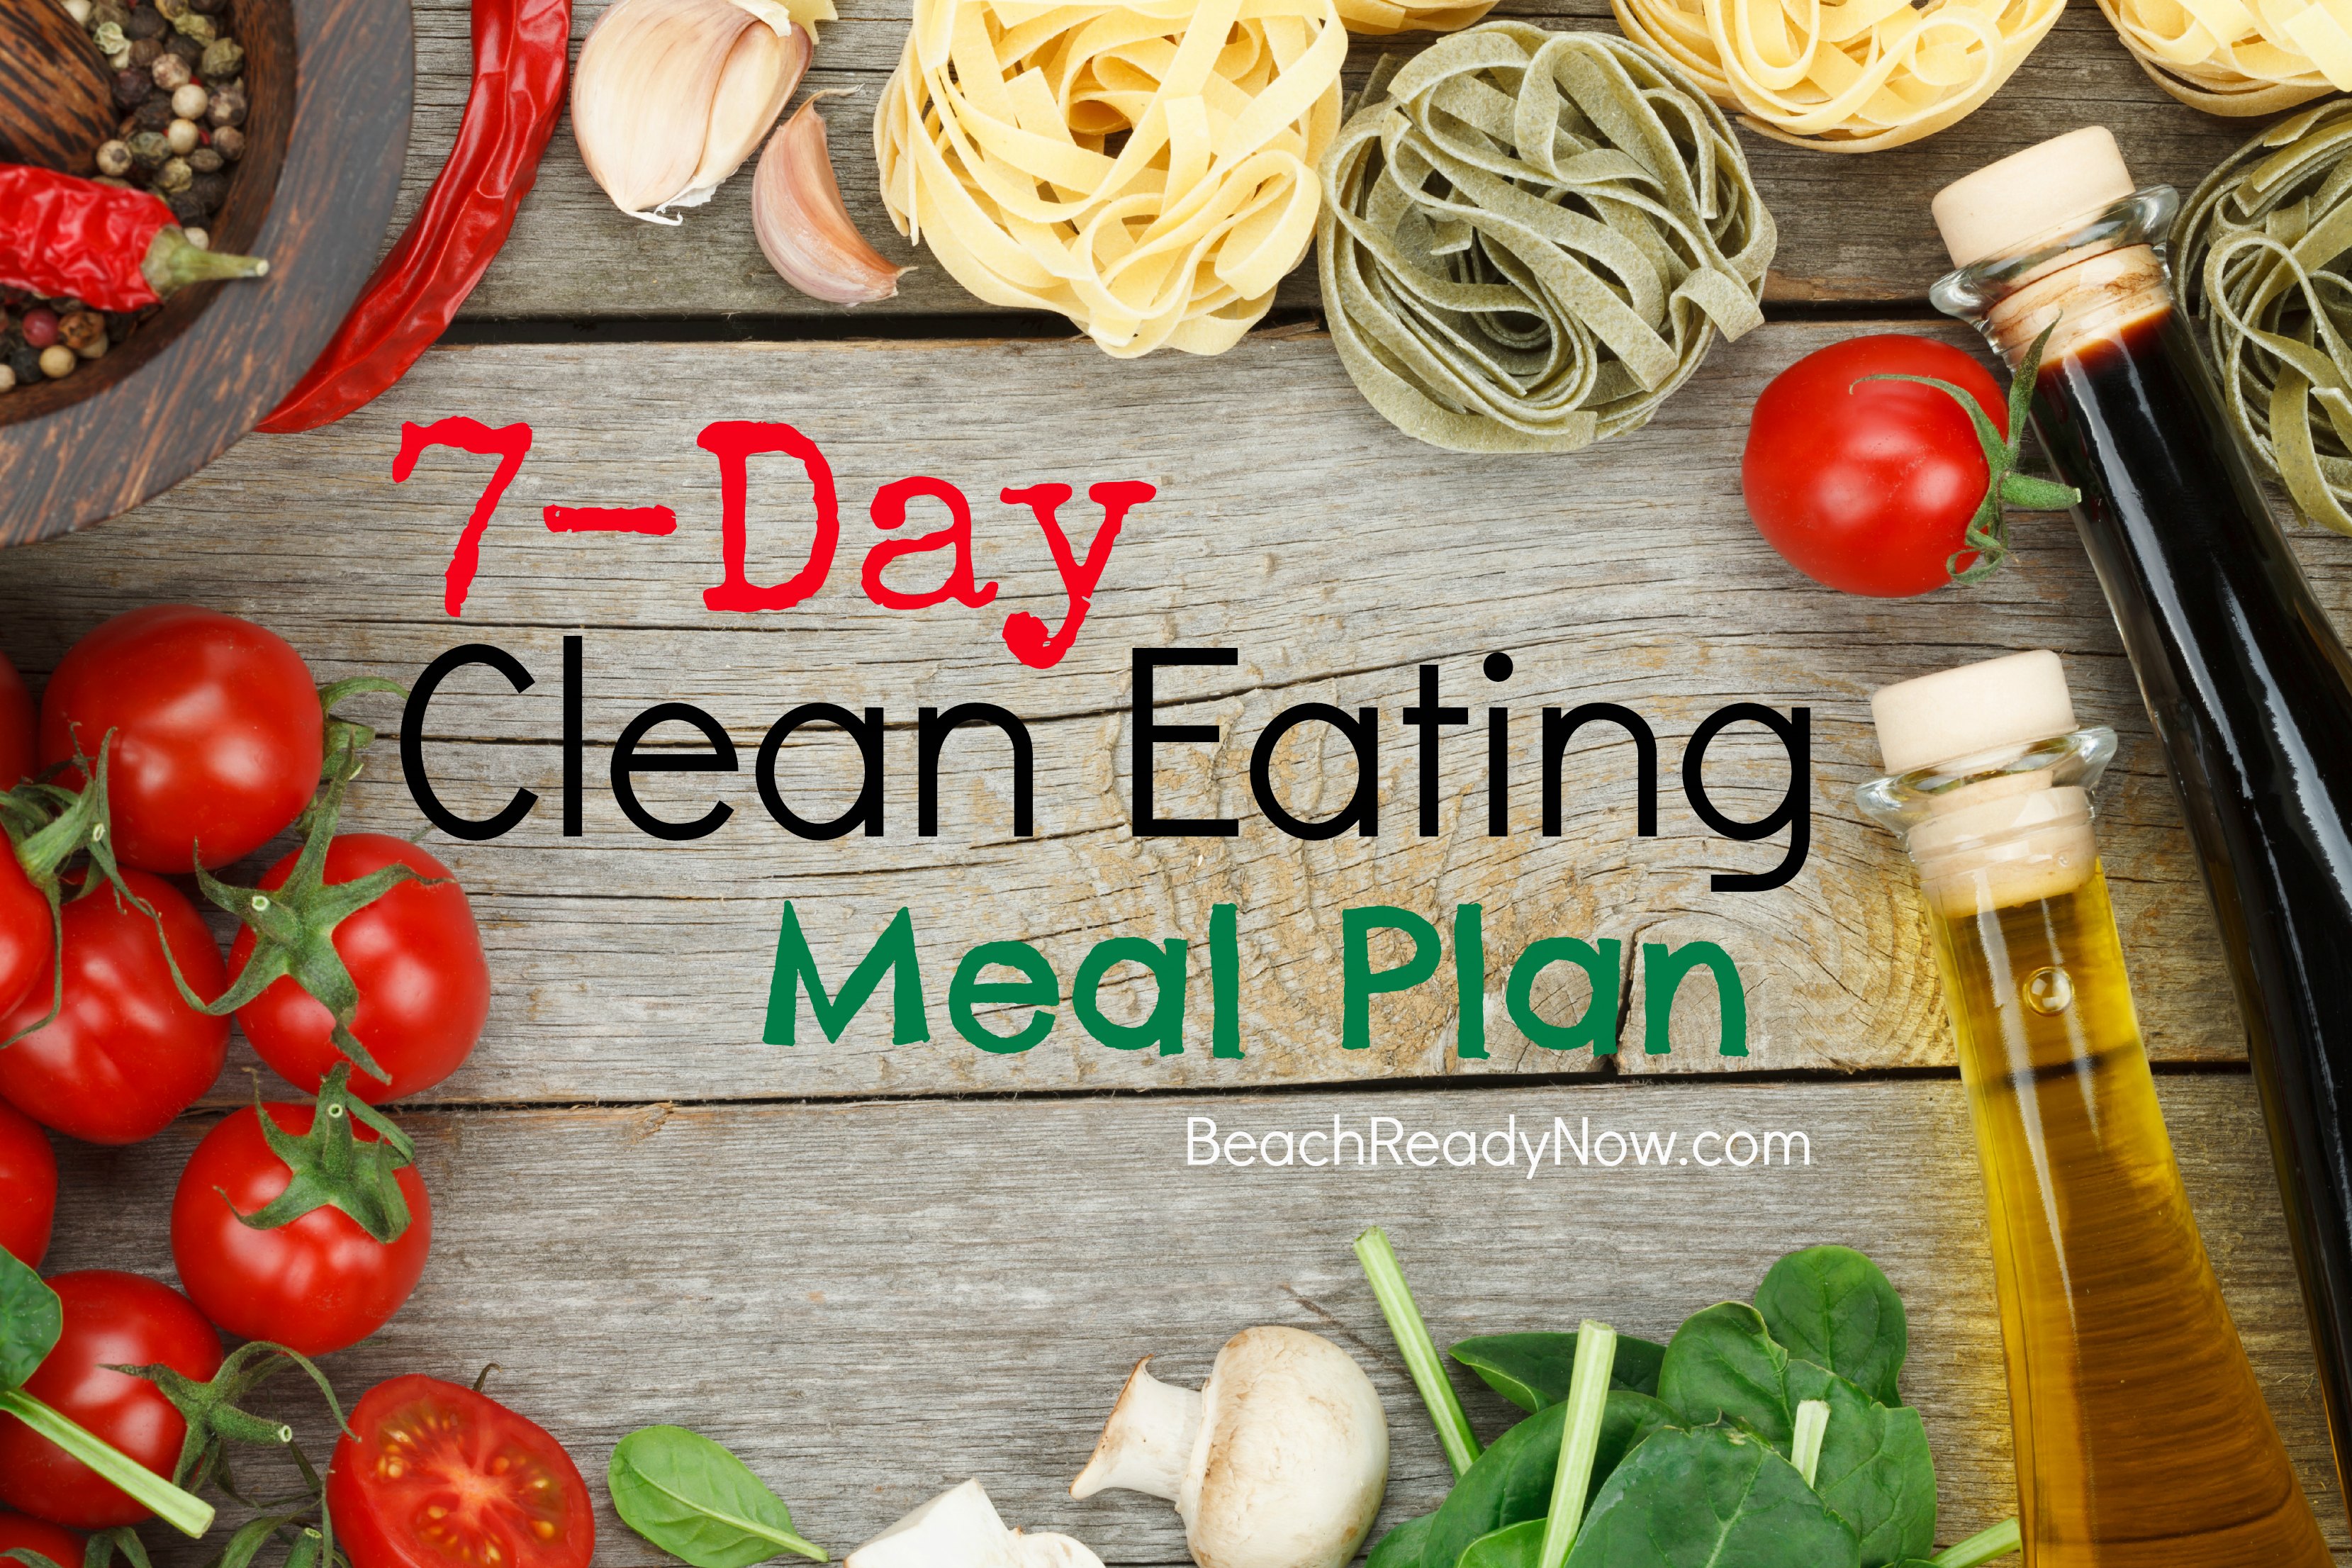 7-Day Clean Eating Meal Plan